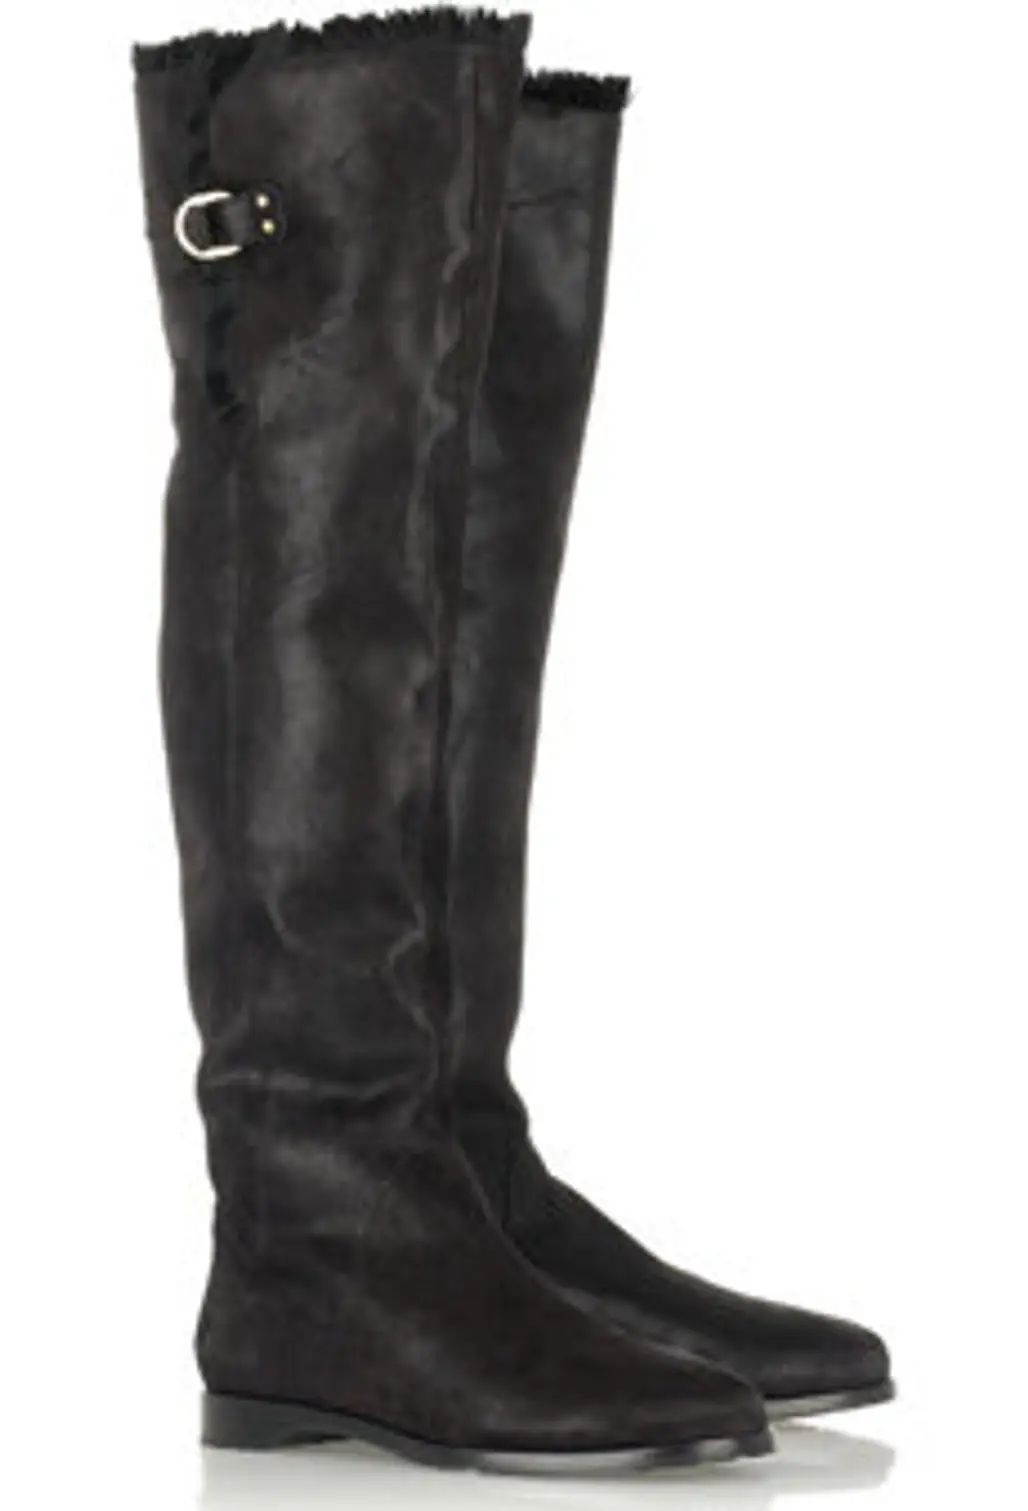 Jimmy Choo Yam over the Knee Leather Boots